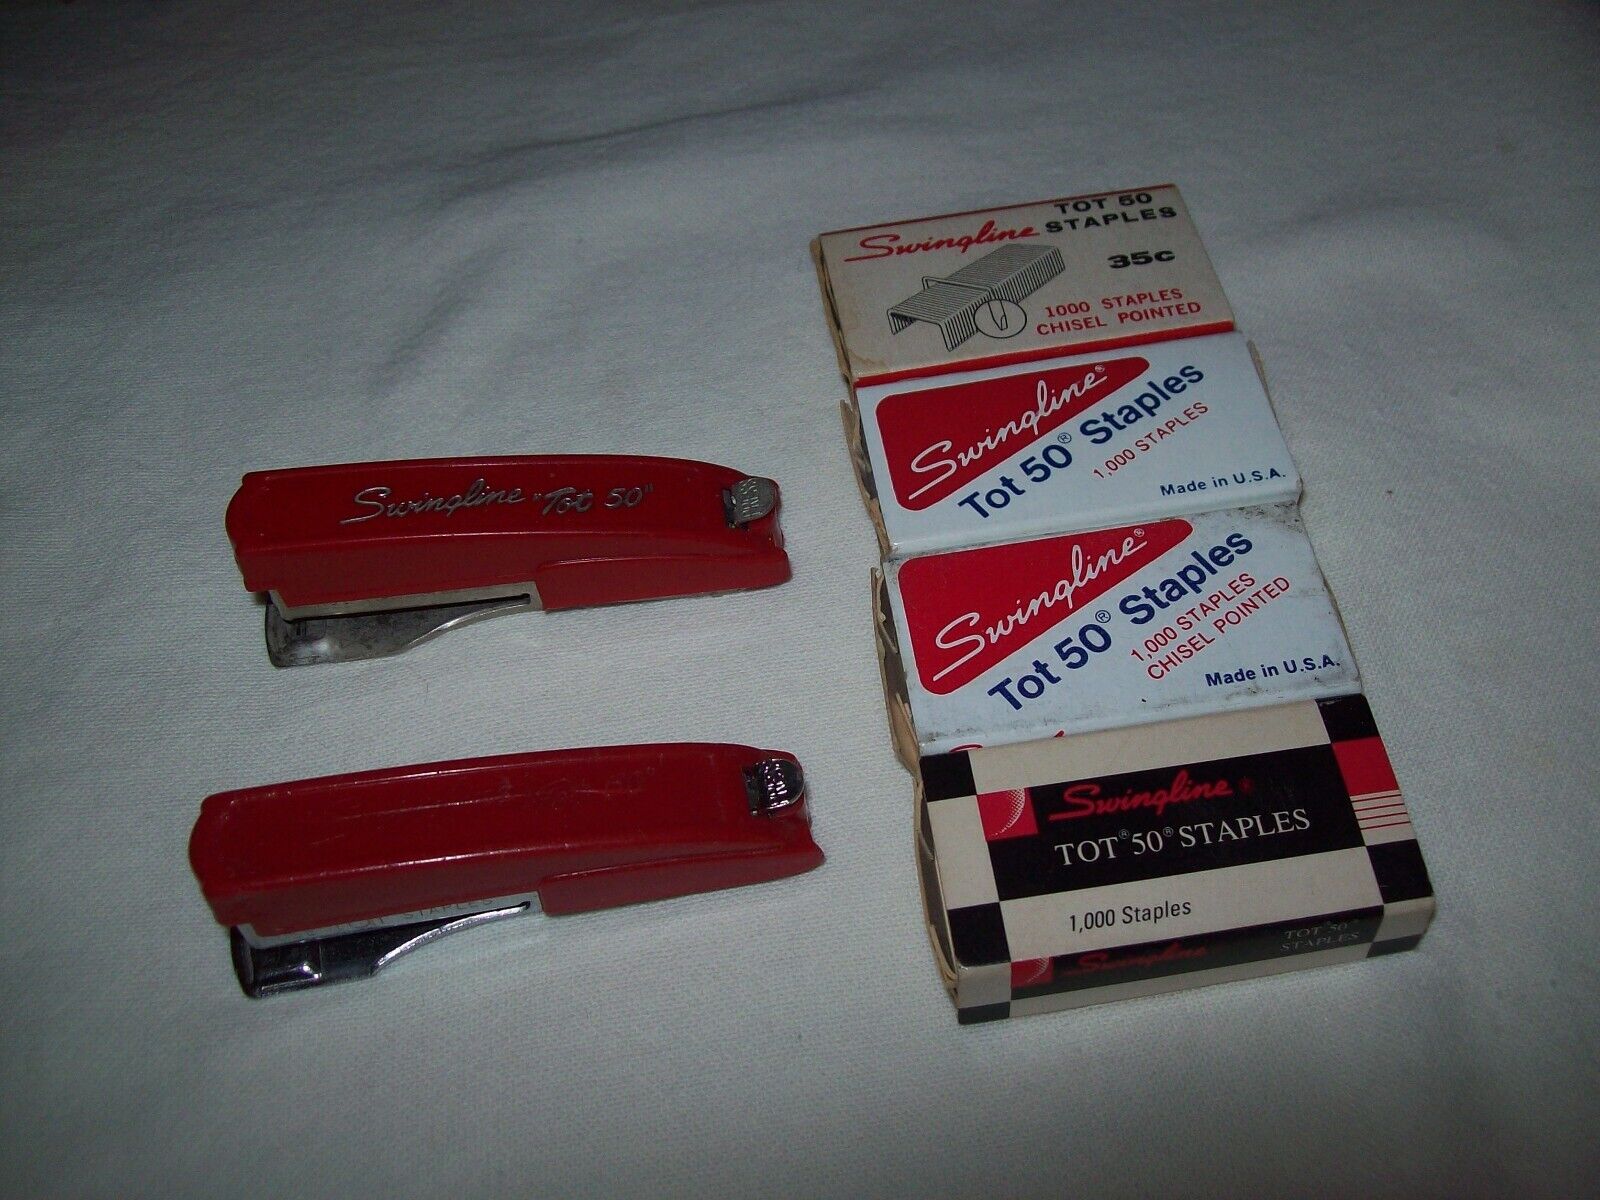 Lot of 2 Vintage Swingline Tot 50 Staplers + lots of staples - Made in USA